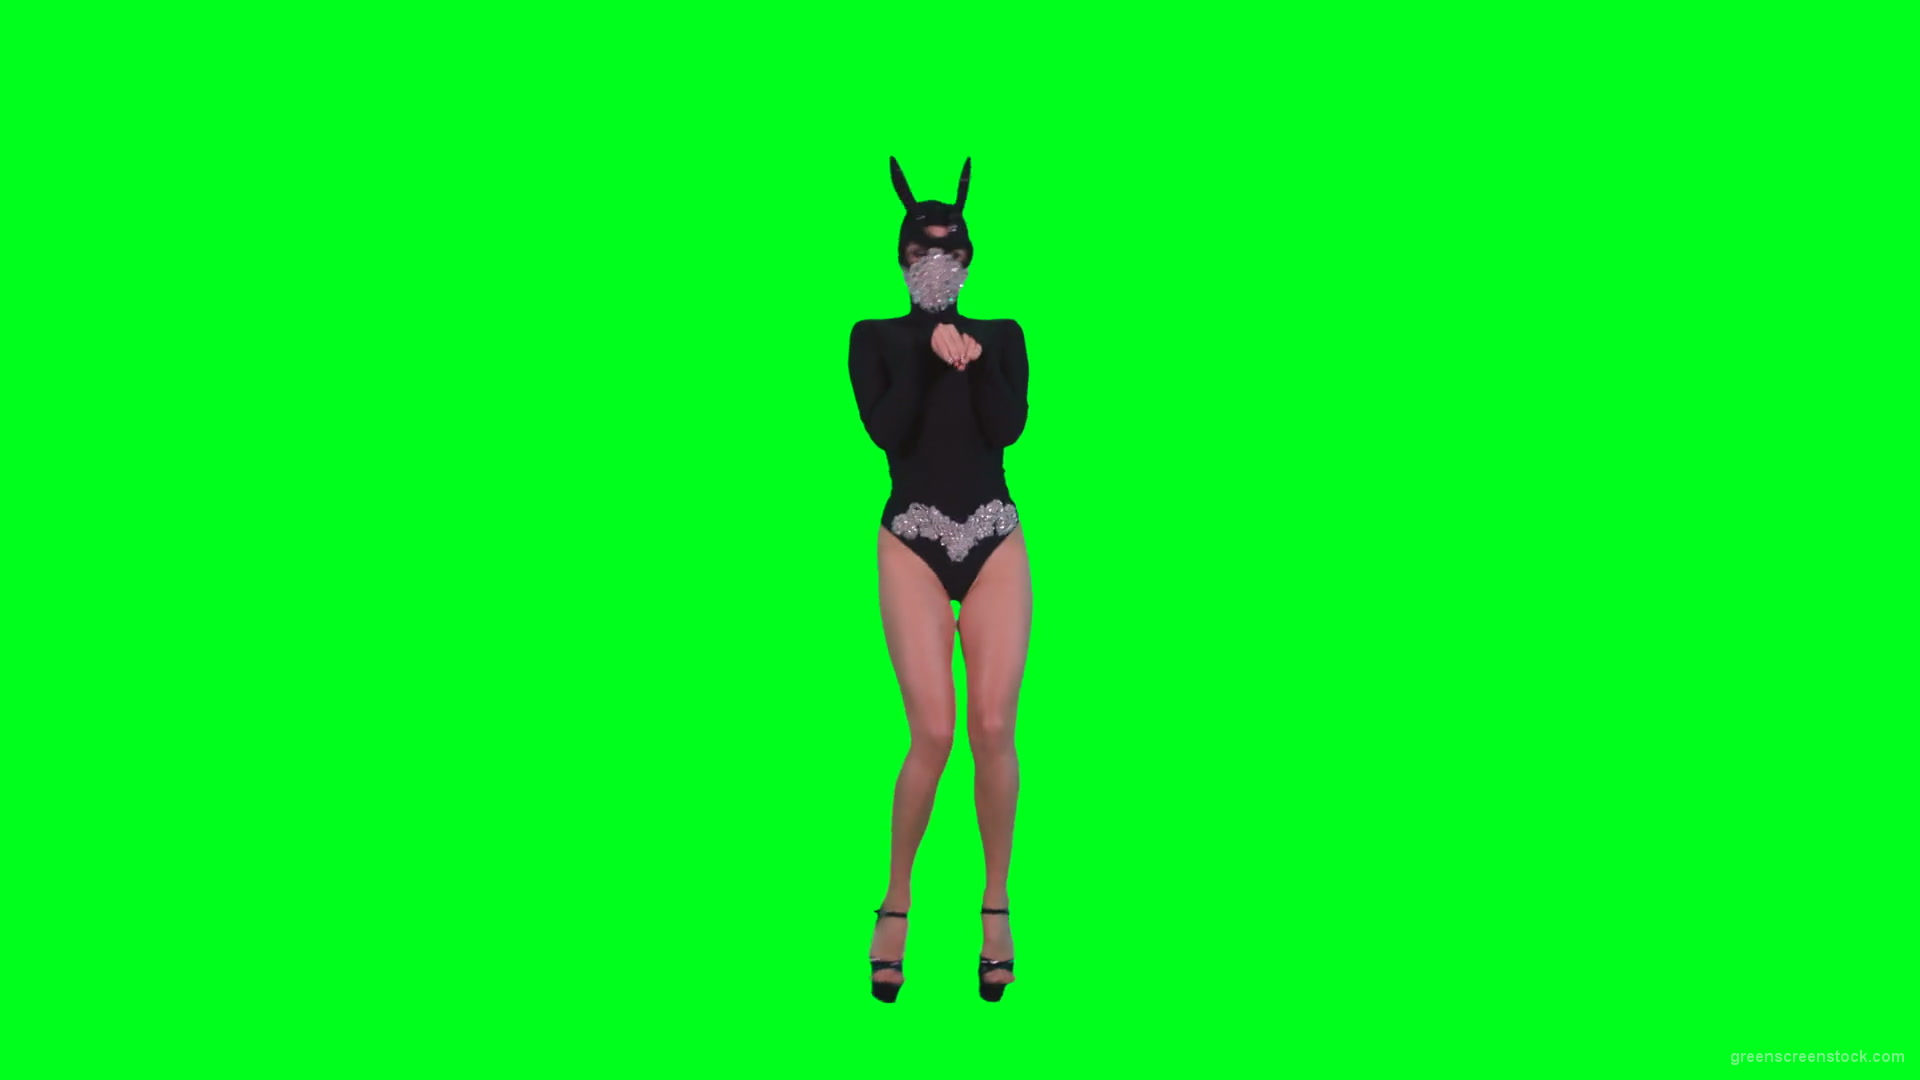 Go-Go-Dancing-Girl-in-Rabbit-Mask-jumping-in-black-costume-on-Green-Screen-4K-Video-Footage-1920_006 Green Screen Stock